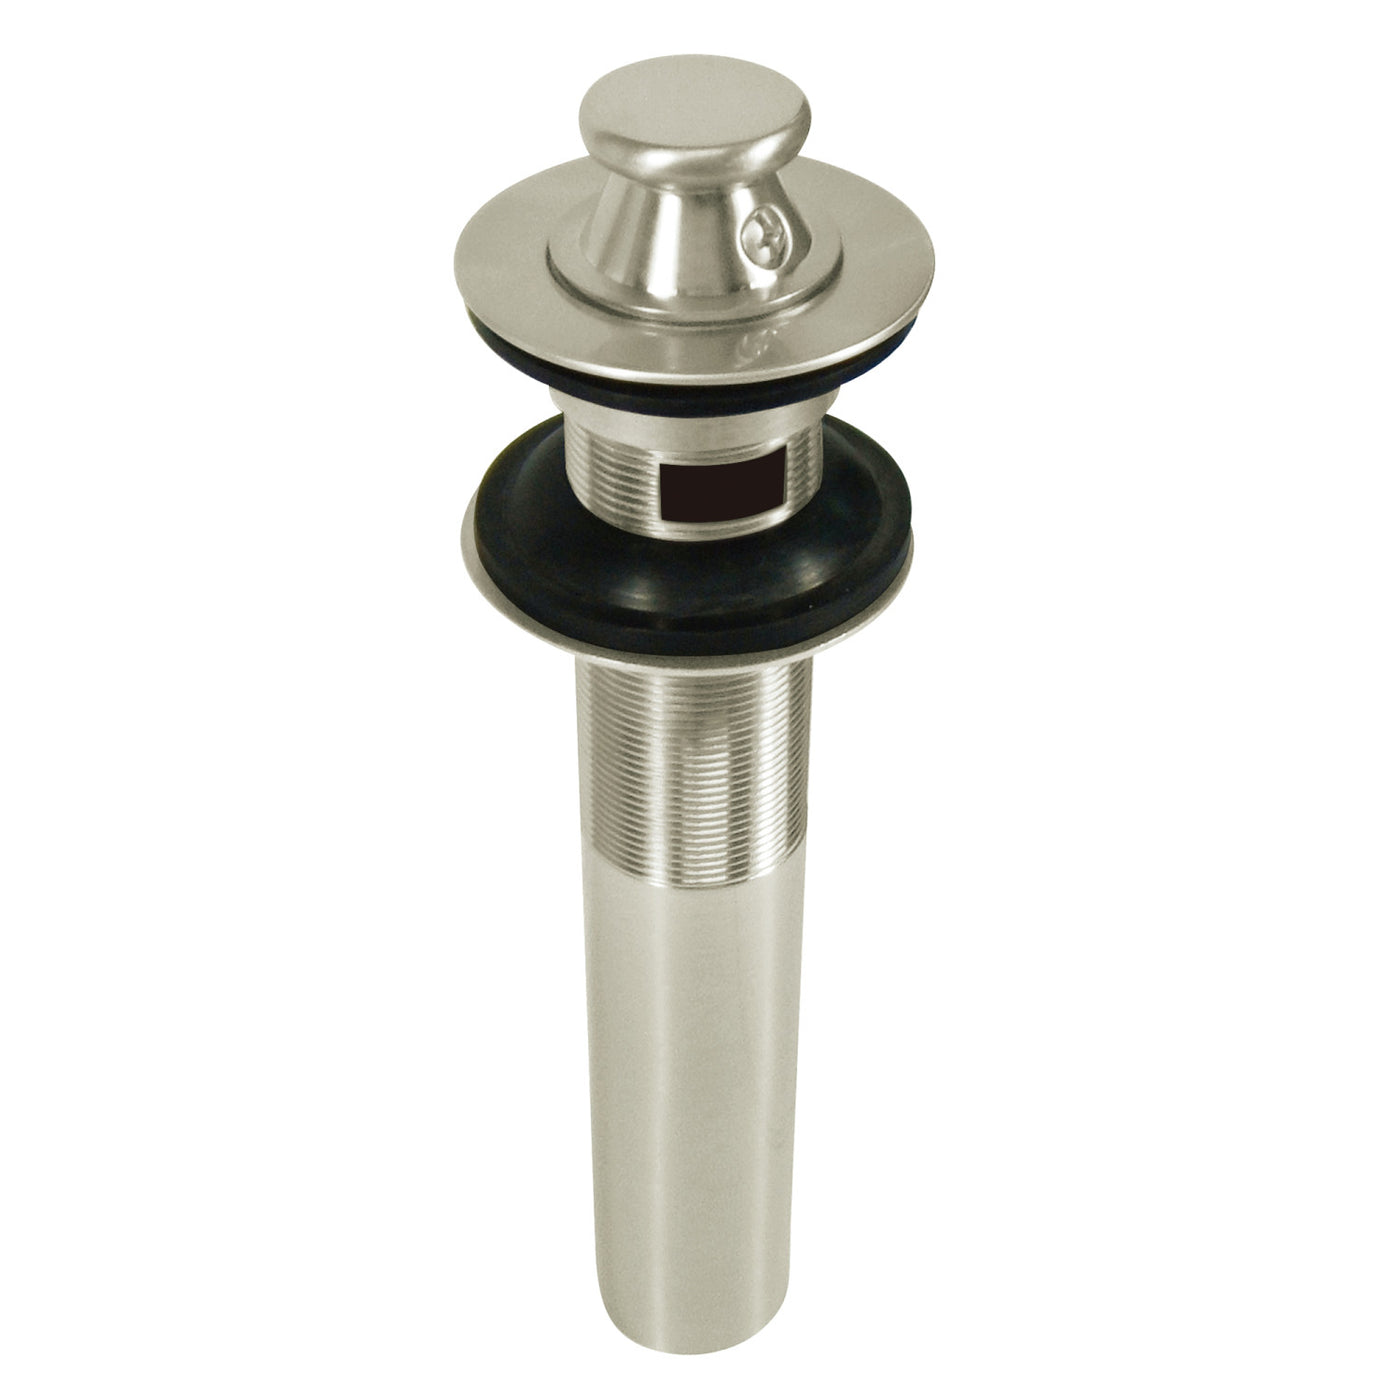 Elements of Design EB3008 Lift and Turn Sink Drain with Overflow, 17 Gauge, Brushed Nickel